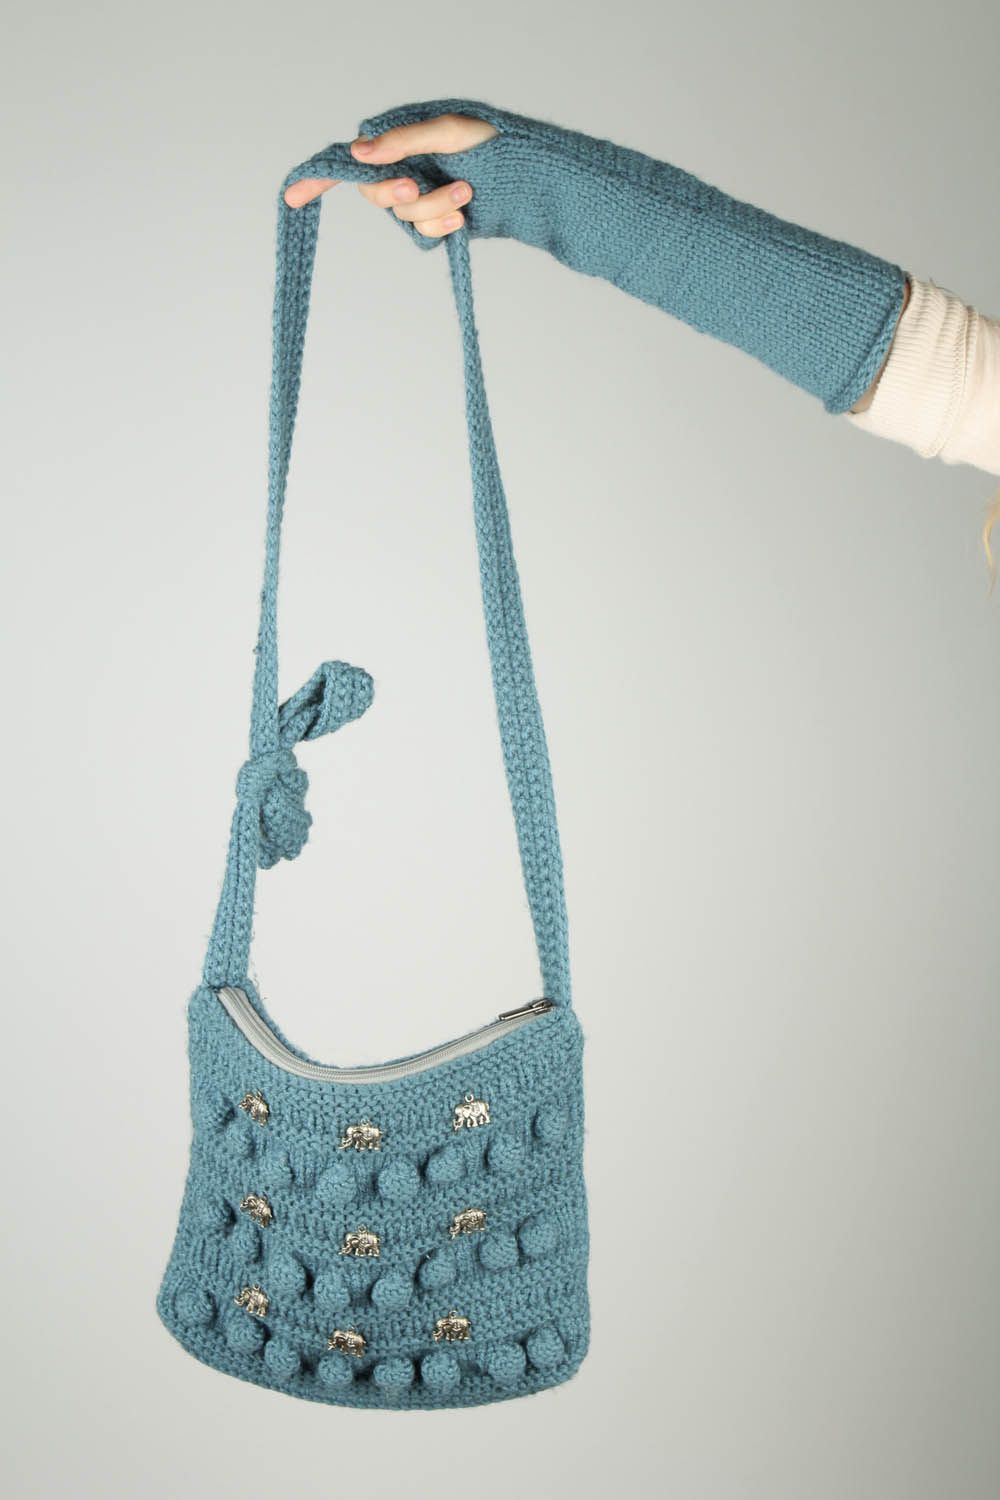 Knitted bag and mitts photo 2